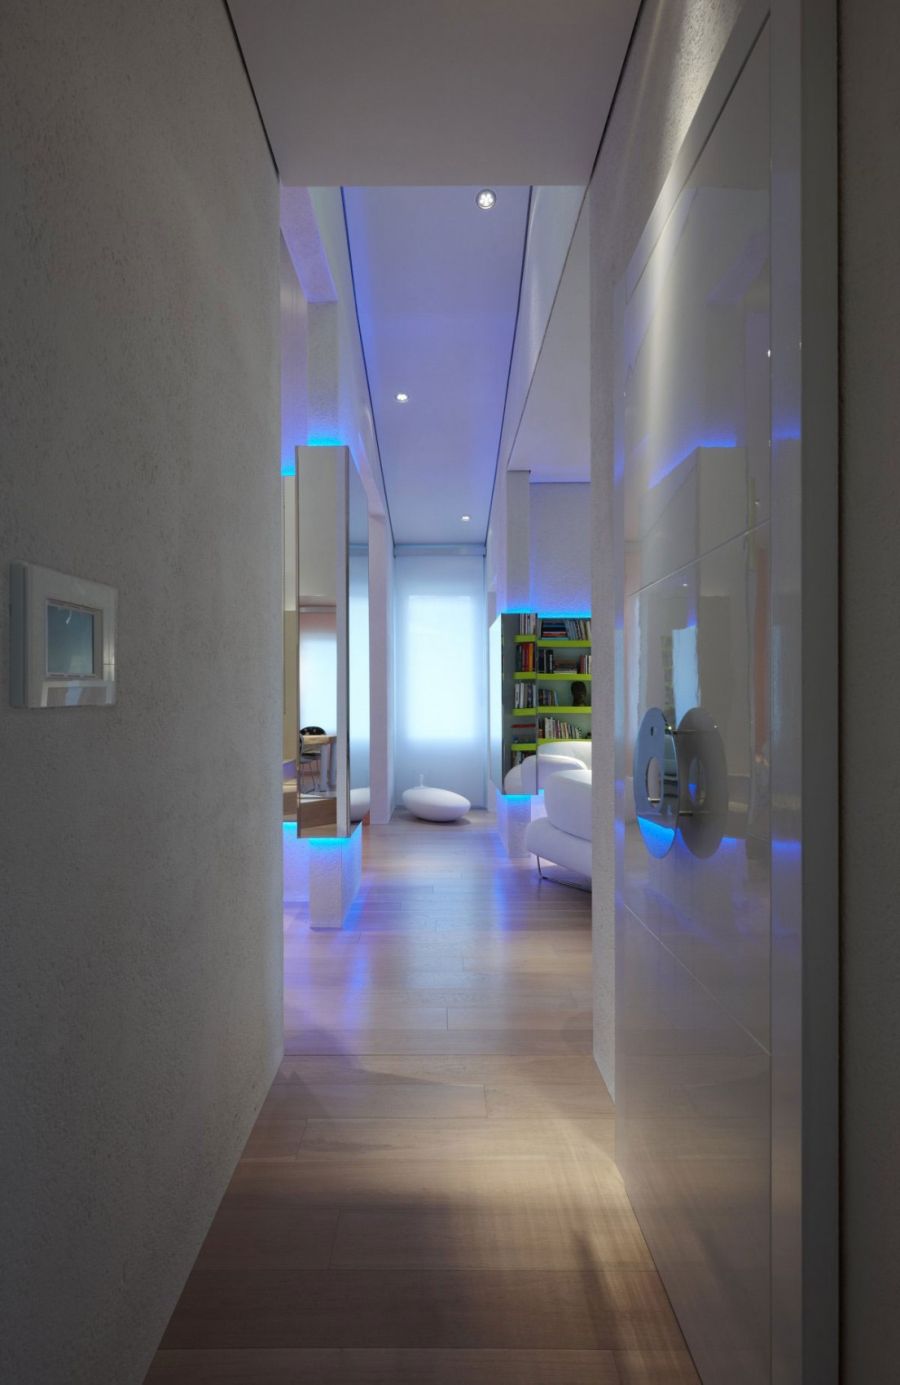 futuristic future ingenious residence charm rustic living micheli simone florence entranceway architect approach bold italian hints avso liked friends story